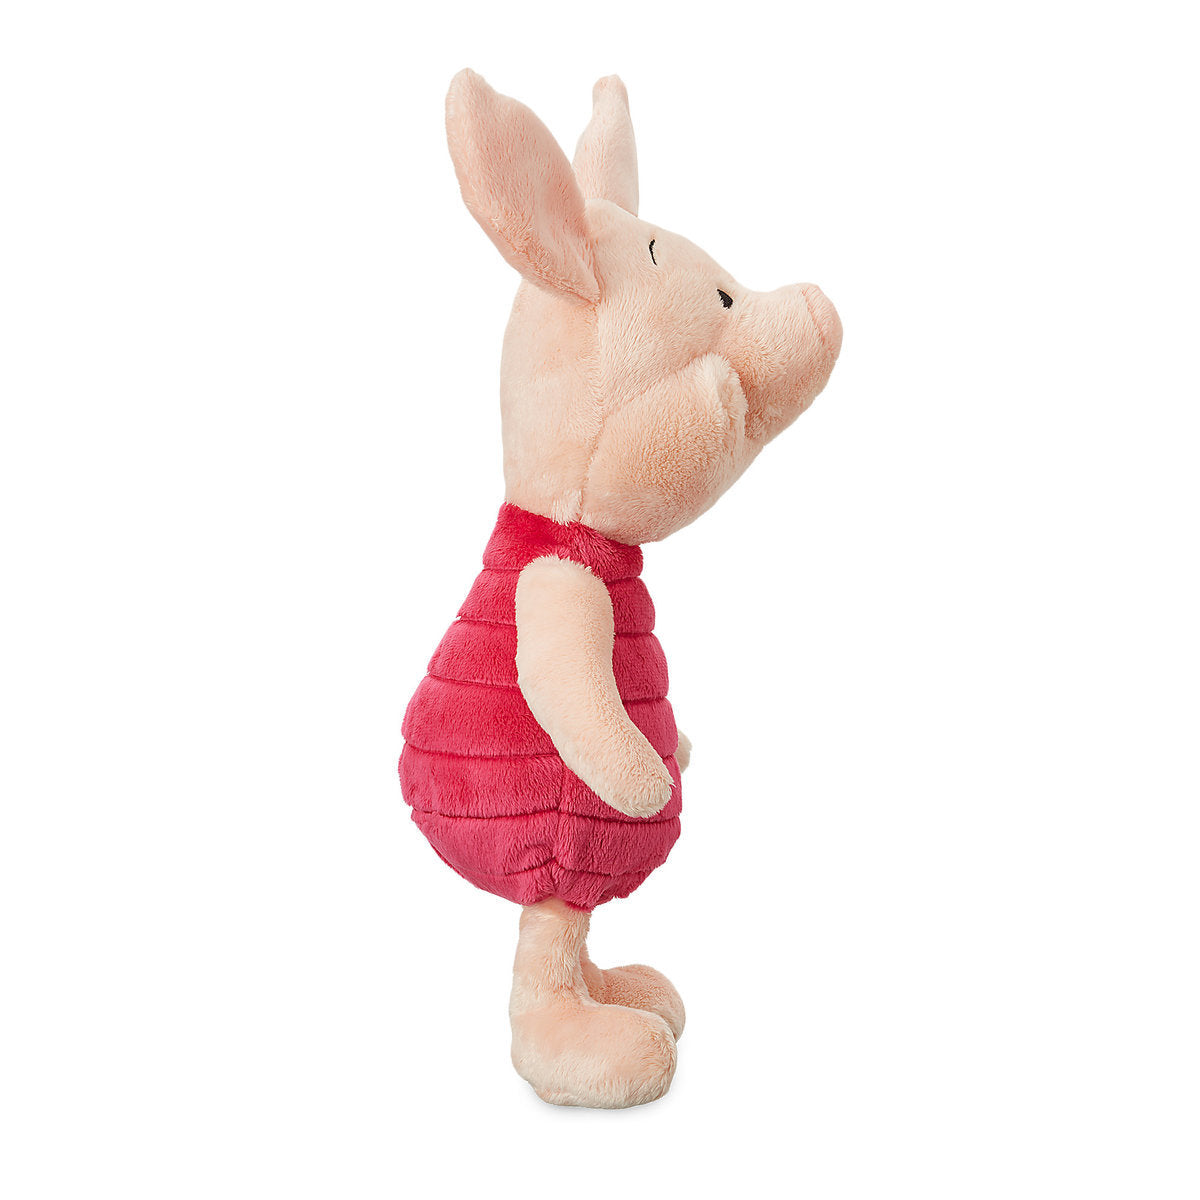 Disney Piglet from Winnie the Pooh Small Plush New with Tags